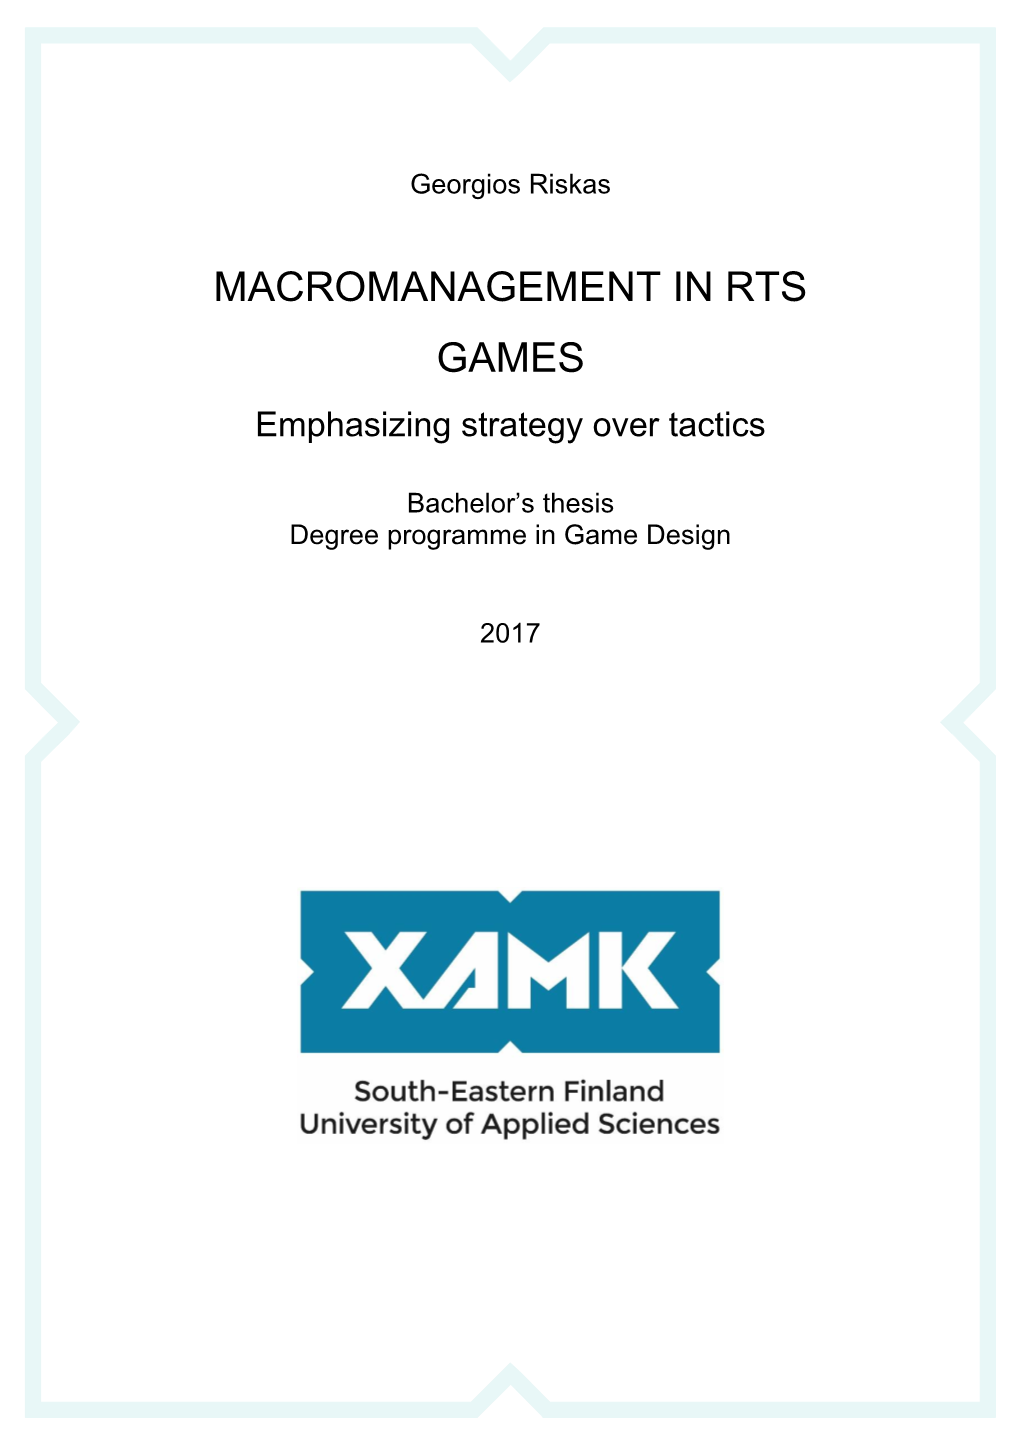 Macromanagement in RTS Games 61 Pages 4 Pages of Appendices Commissioned By